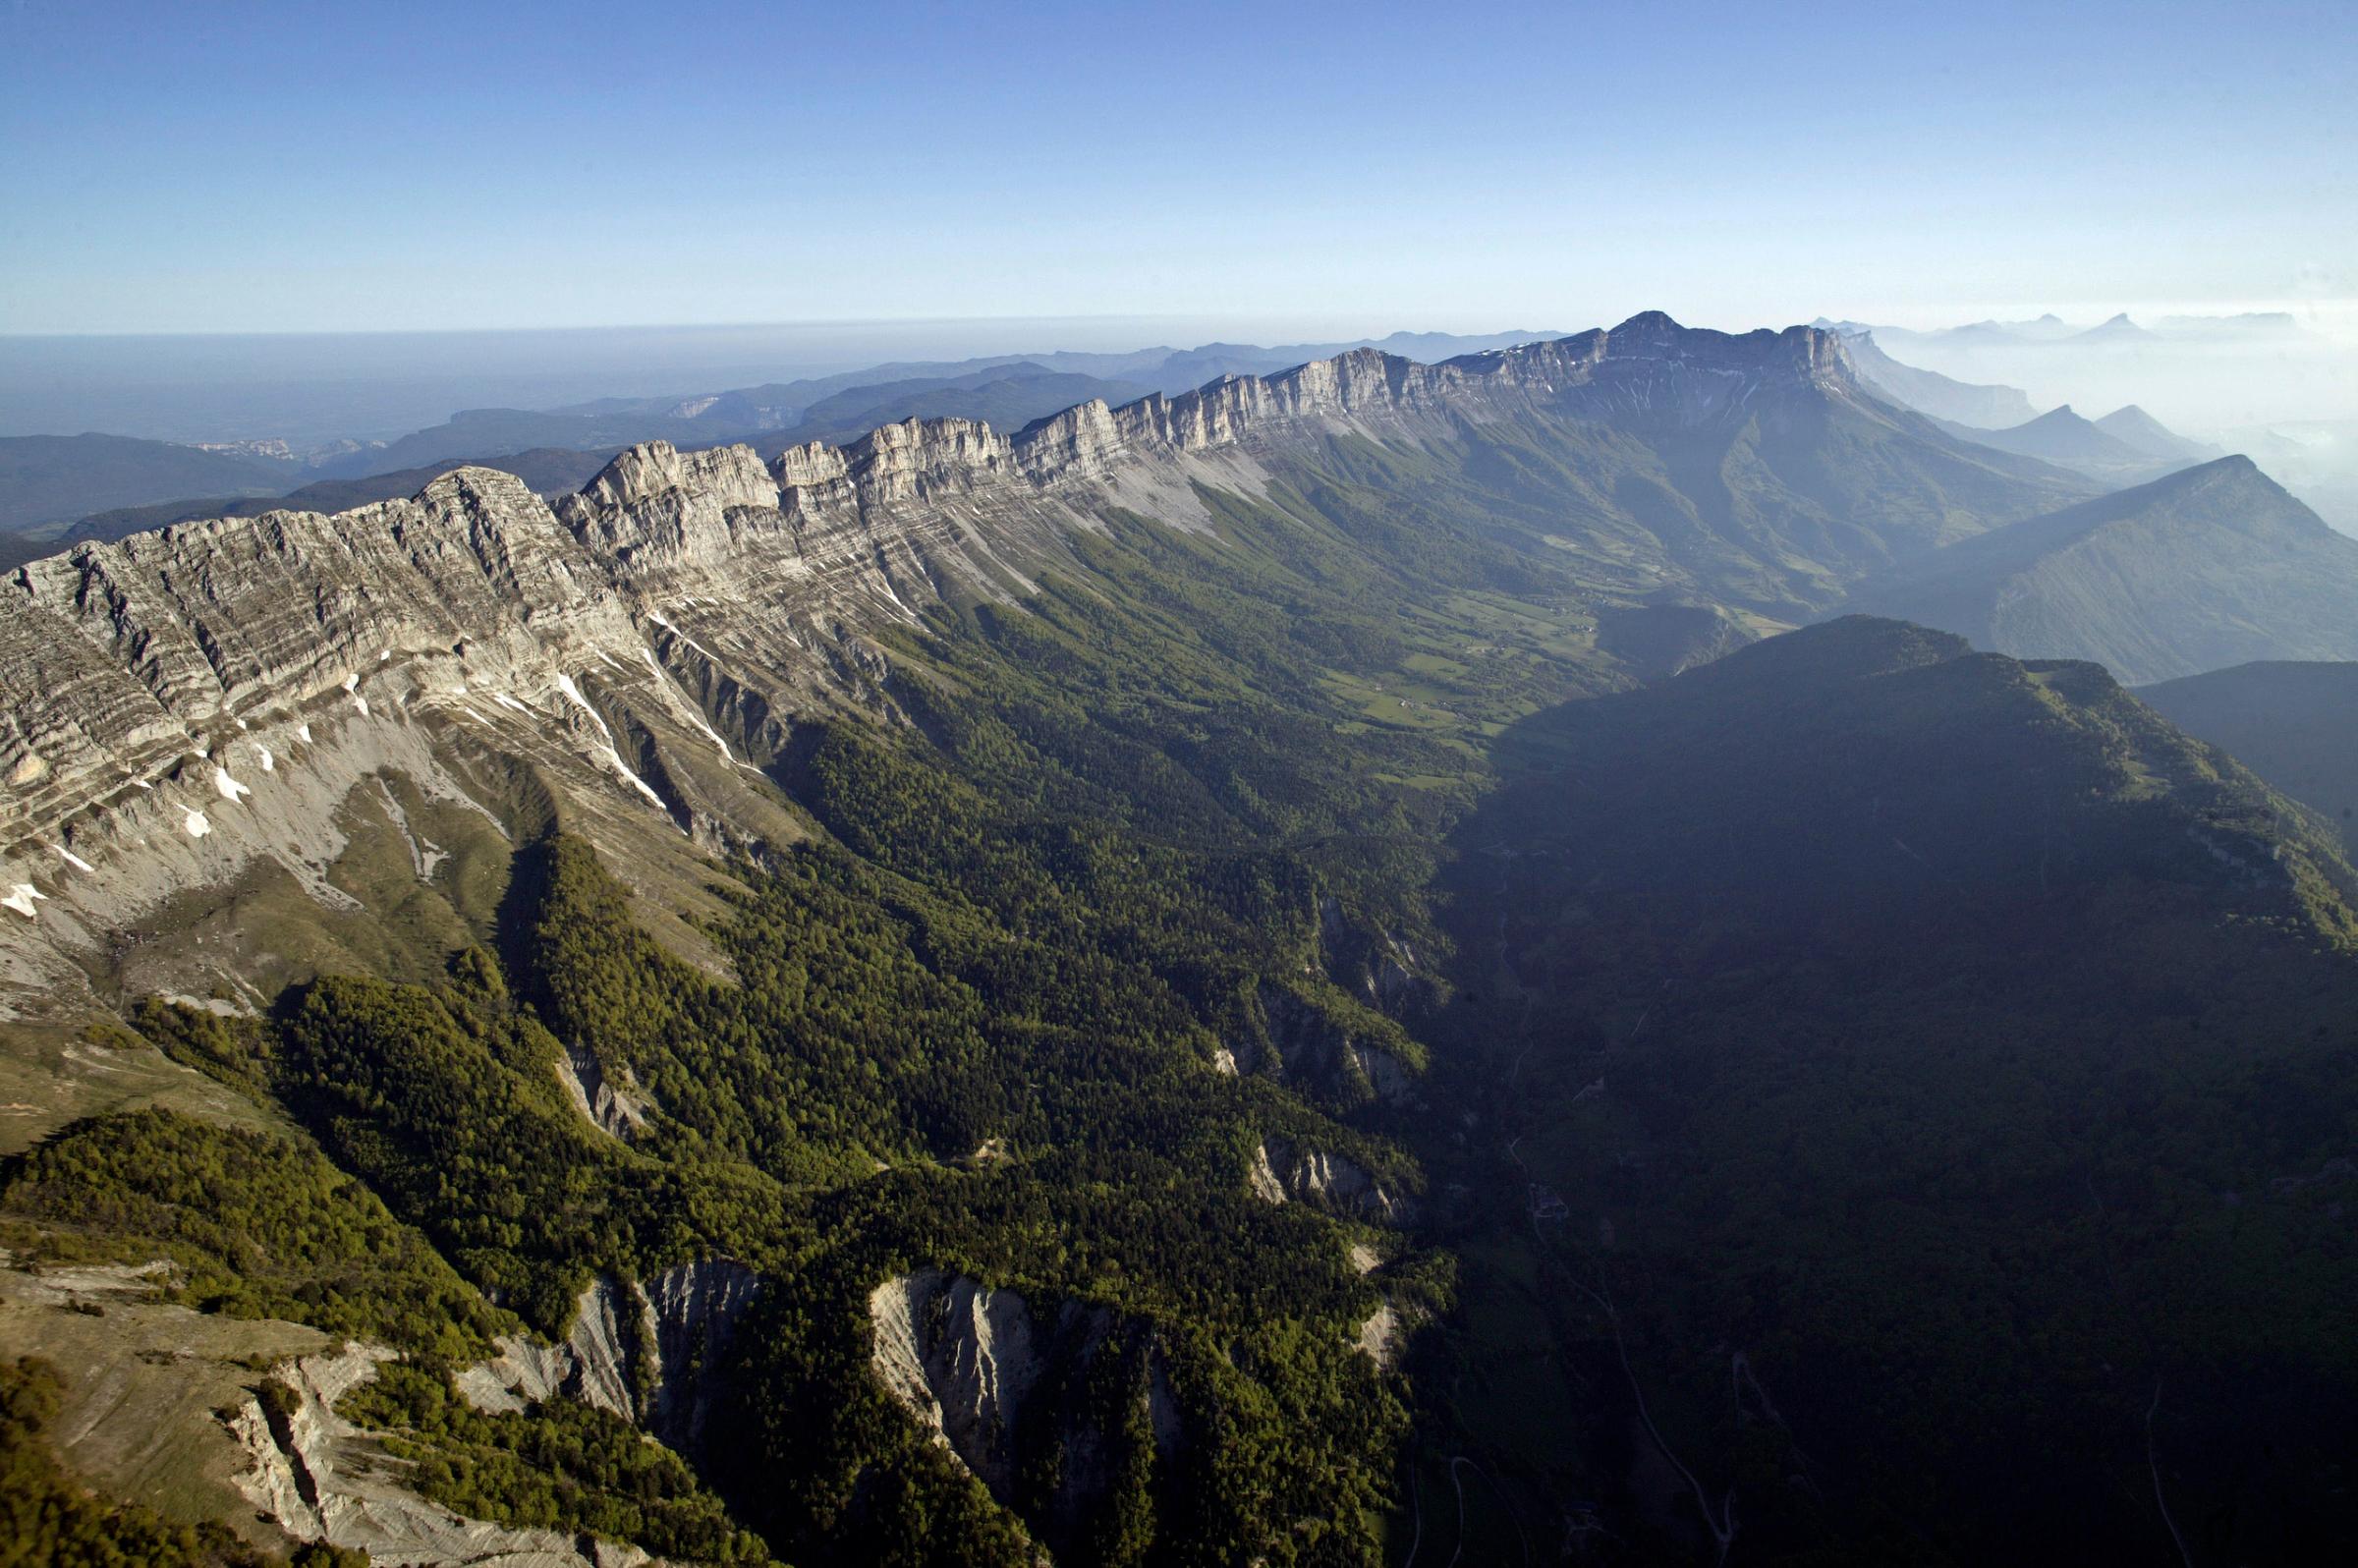 Vercors Massif, Vercors Regional Natural Park, France. This park contains the French Western Alps and covers 135,000 hectares. The limestone cliffs here are dotted with caves and were a base for the French Resistance during WWII.